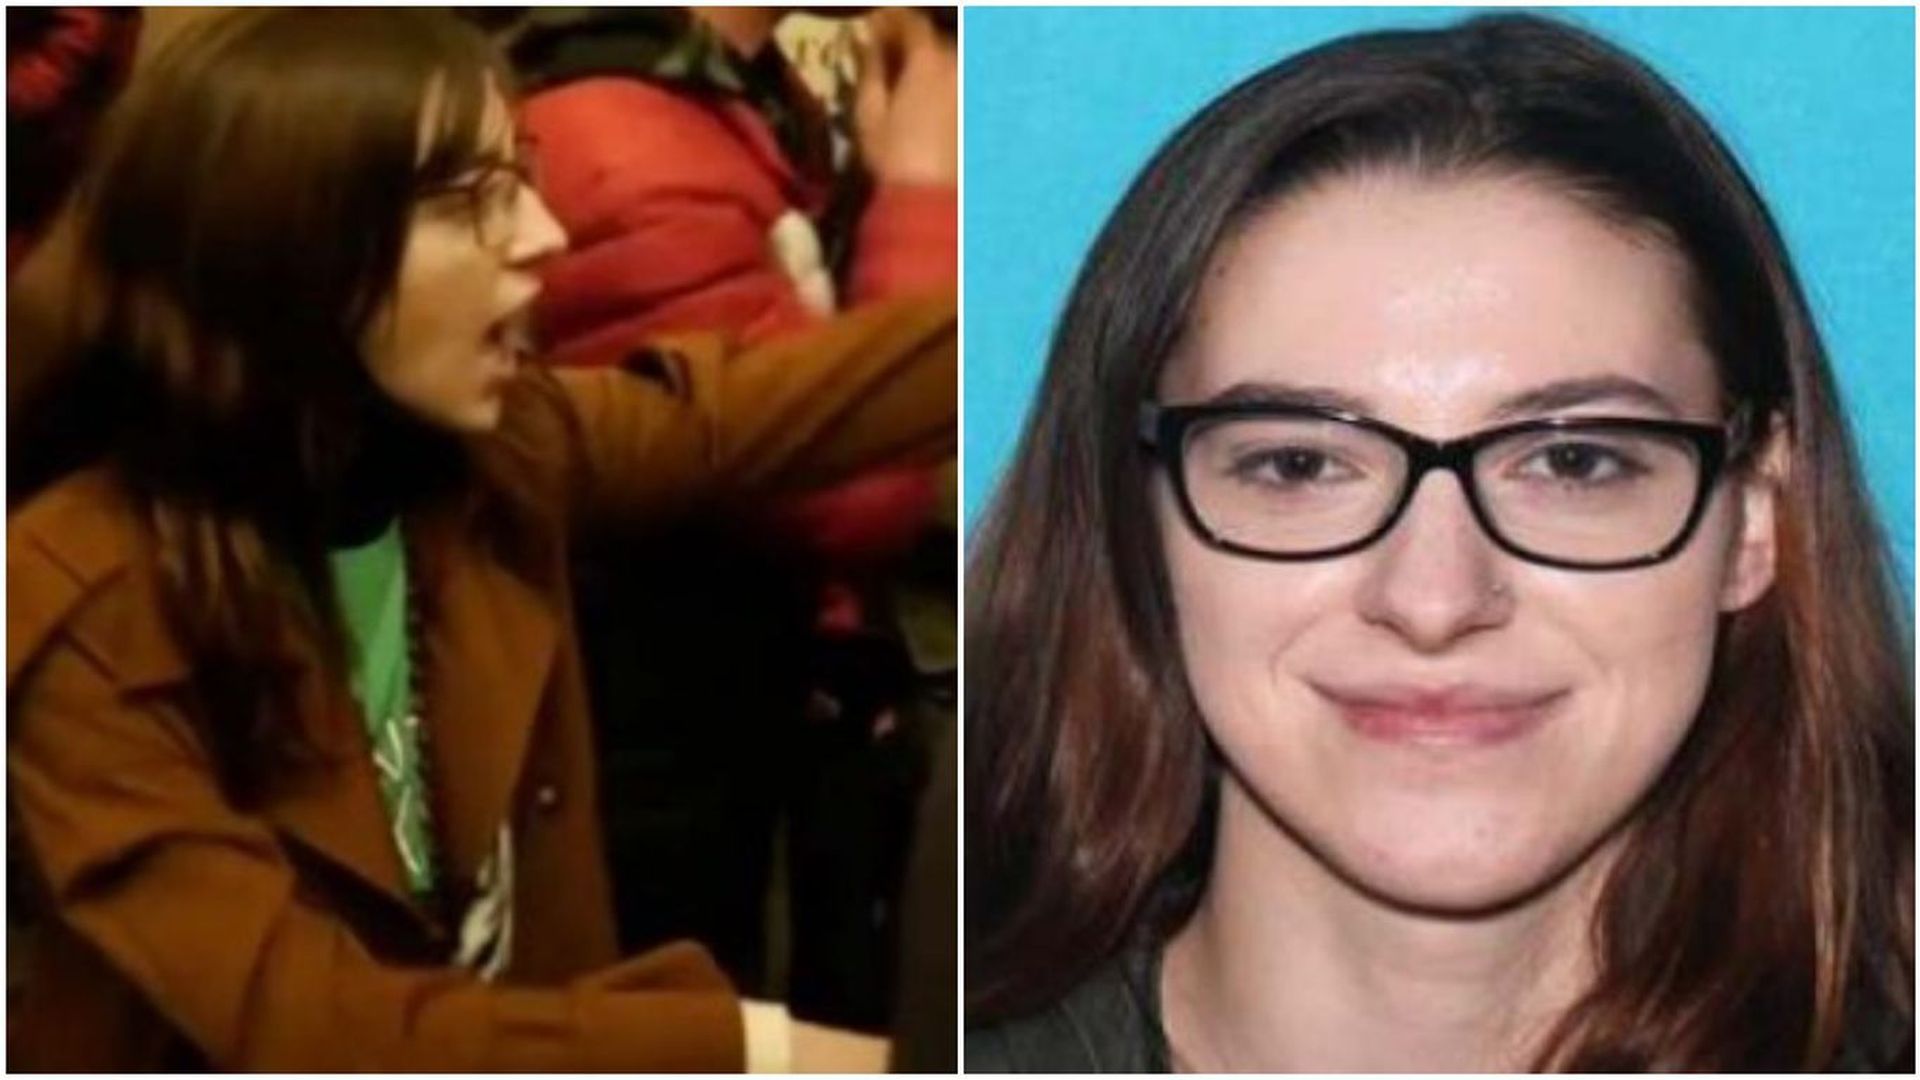 Photo of Riley Williams at the Jan. 6 insurrection on the left and her mug shot on the right